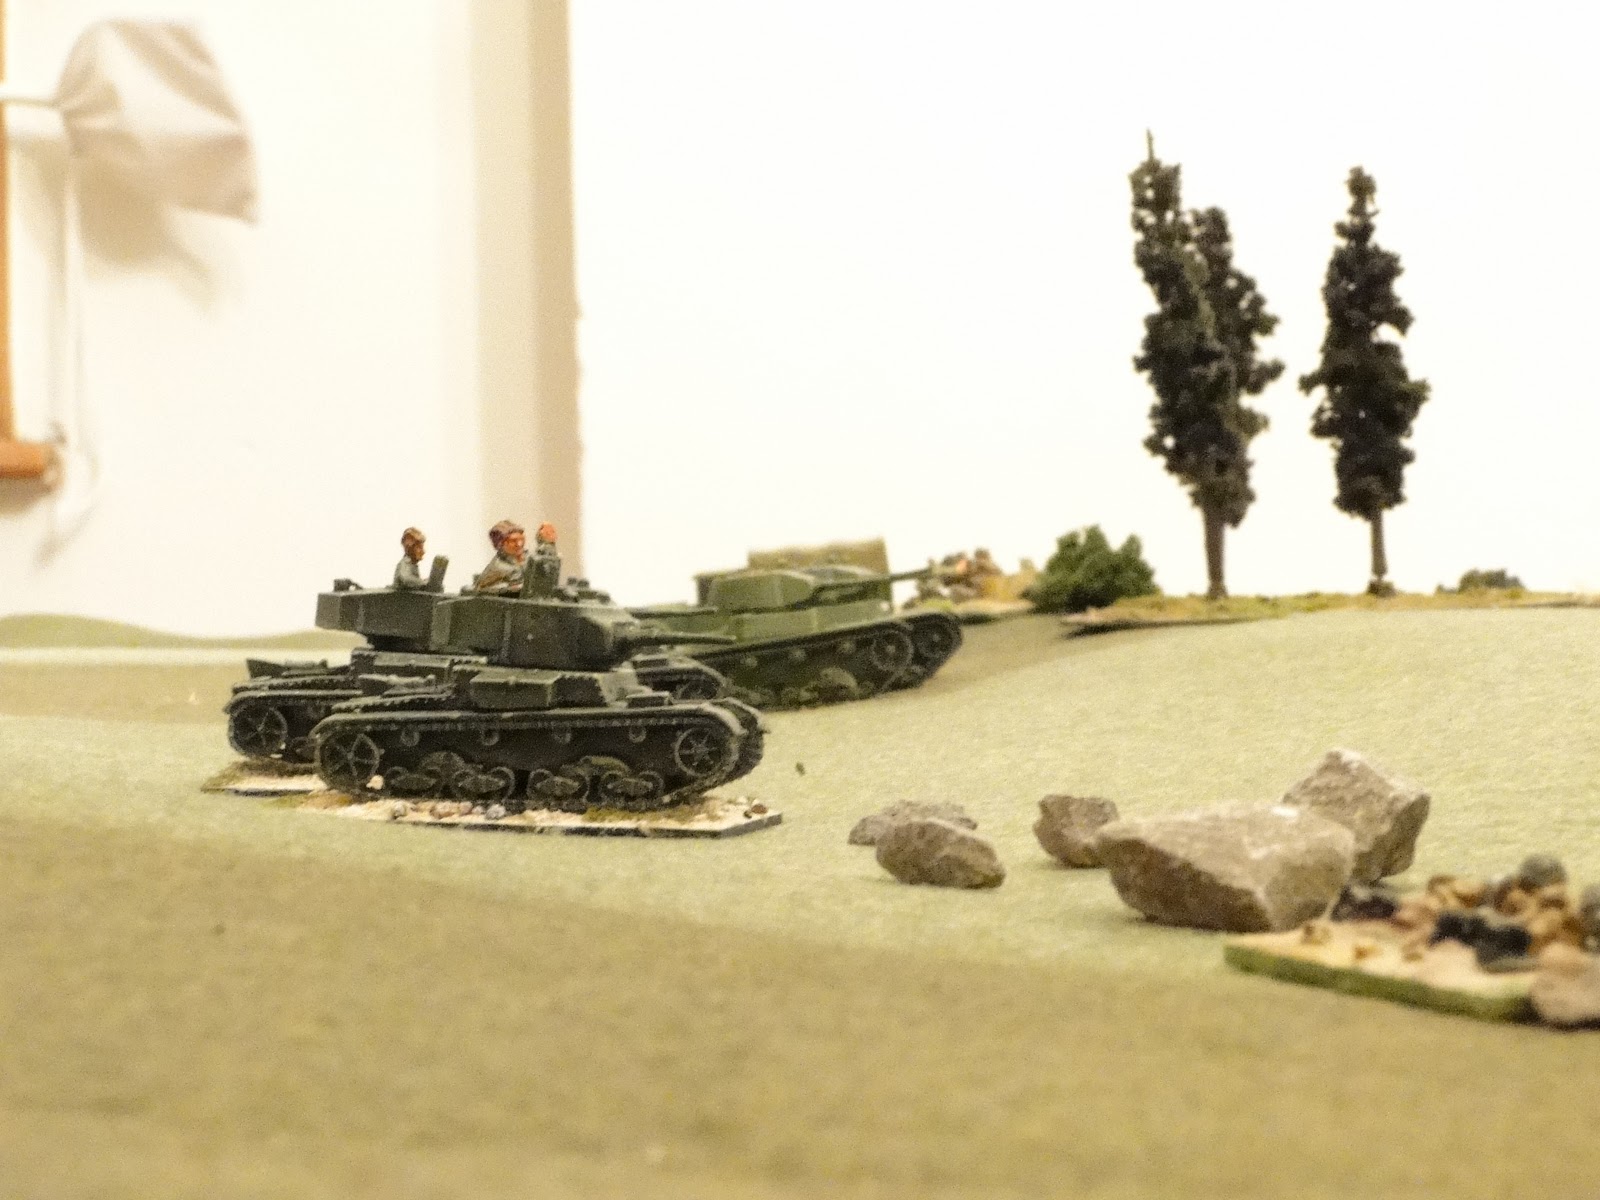 With no Big Men to rally them the T26s tactics are to hold their position and fire from hull down positions.